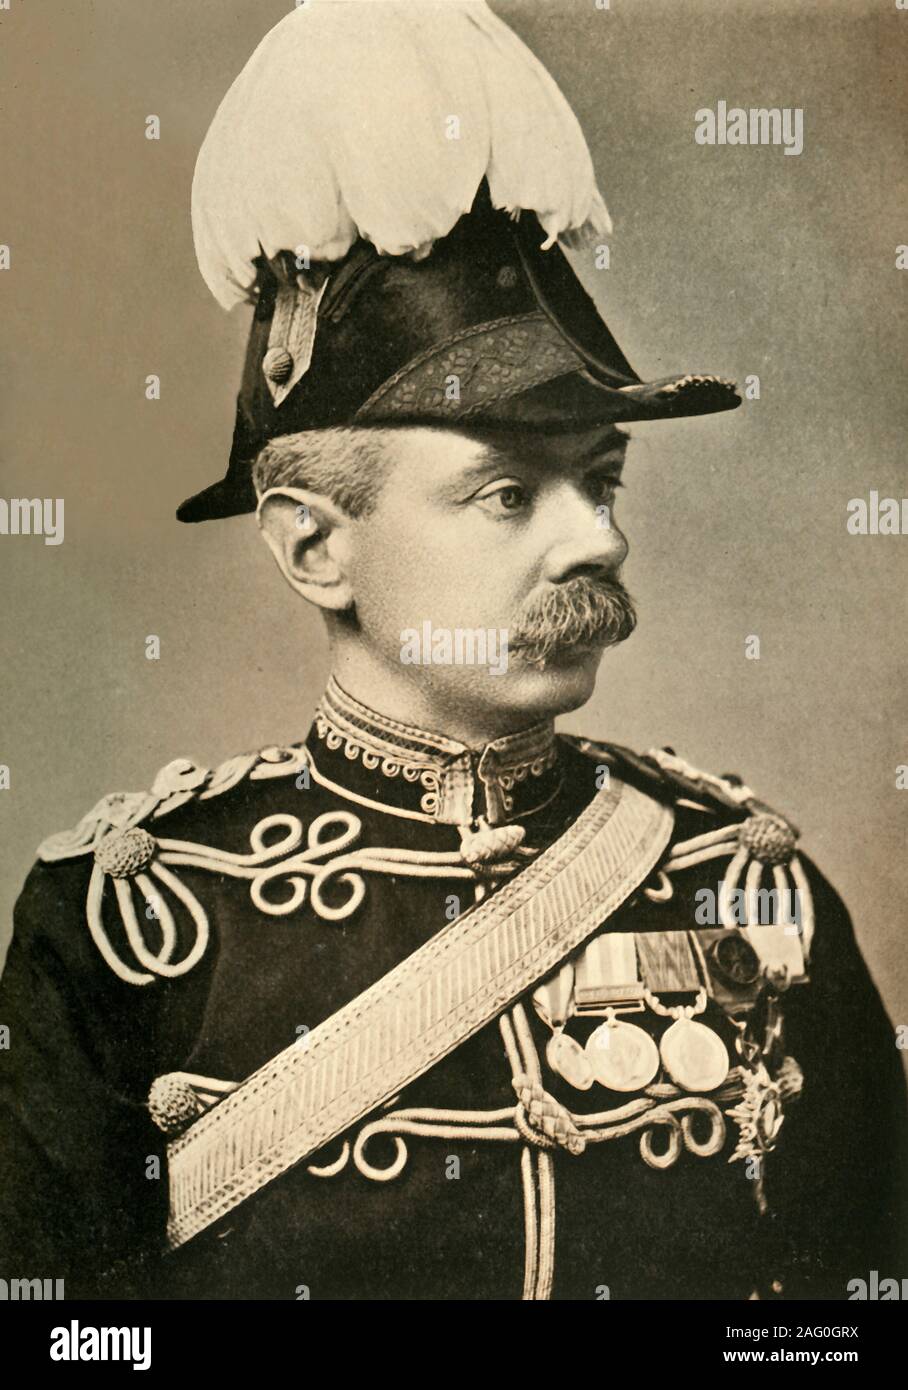 'Lieut.-Colonel Plumer', 1901. Herbert Charles Onslow Plumer (1857-1932) senior British Army officer who led the mounted infantry at the Relief of Mafeking during the Second Boer War and was promoted to colonel on 29 November 1900. From &quot;South Africa and the Transvaal War, Vol. V&quot;, by Louis Creswicke. [T. C. &amp; E. C. Jack, Edinburgh, 1901] Stock Photo